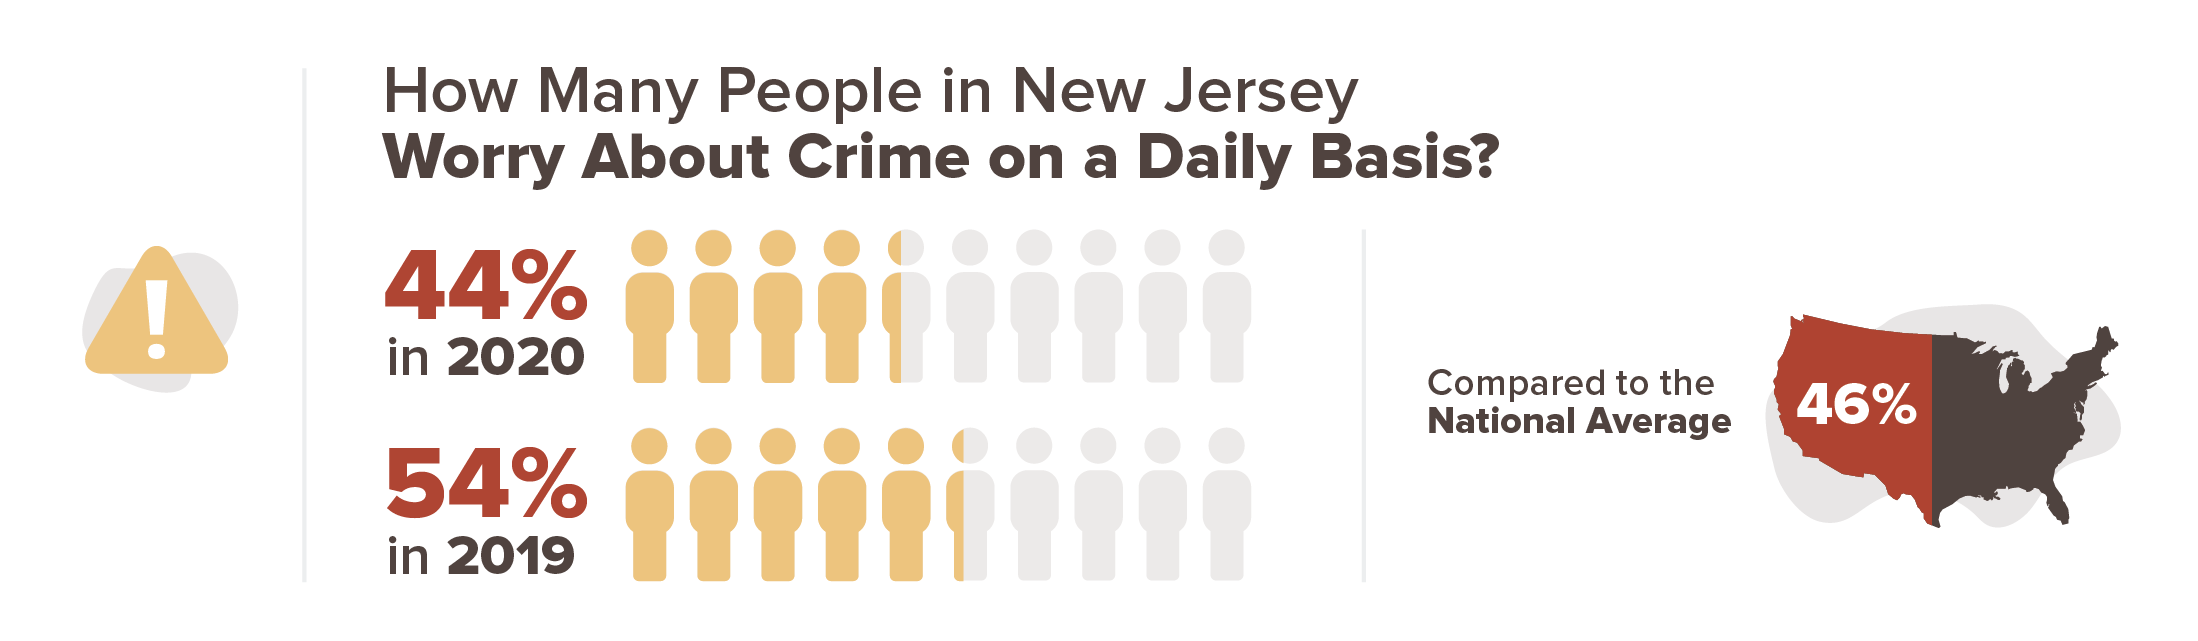 New Jersey crime concern infographic